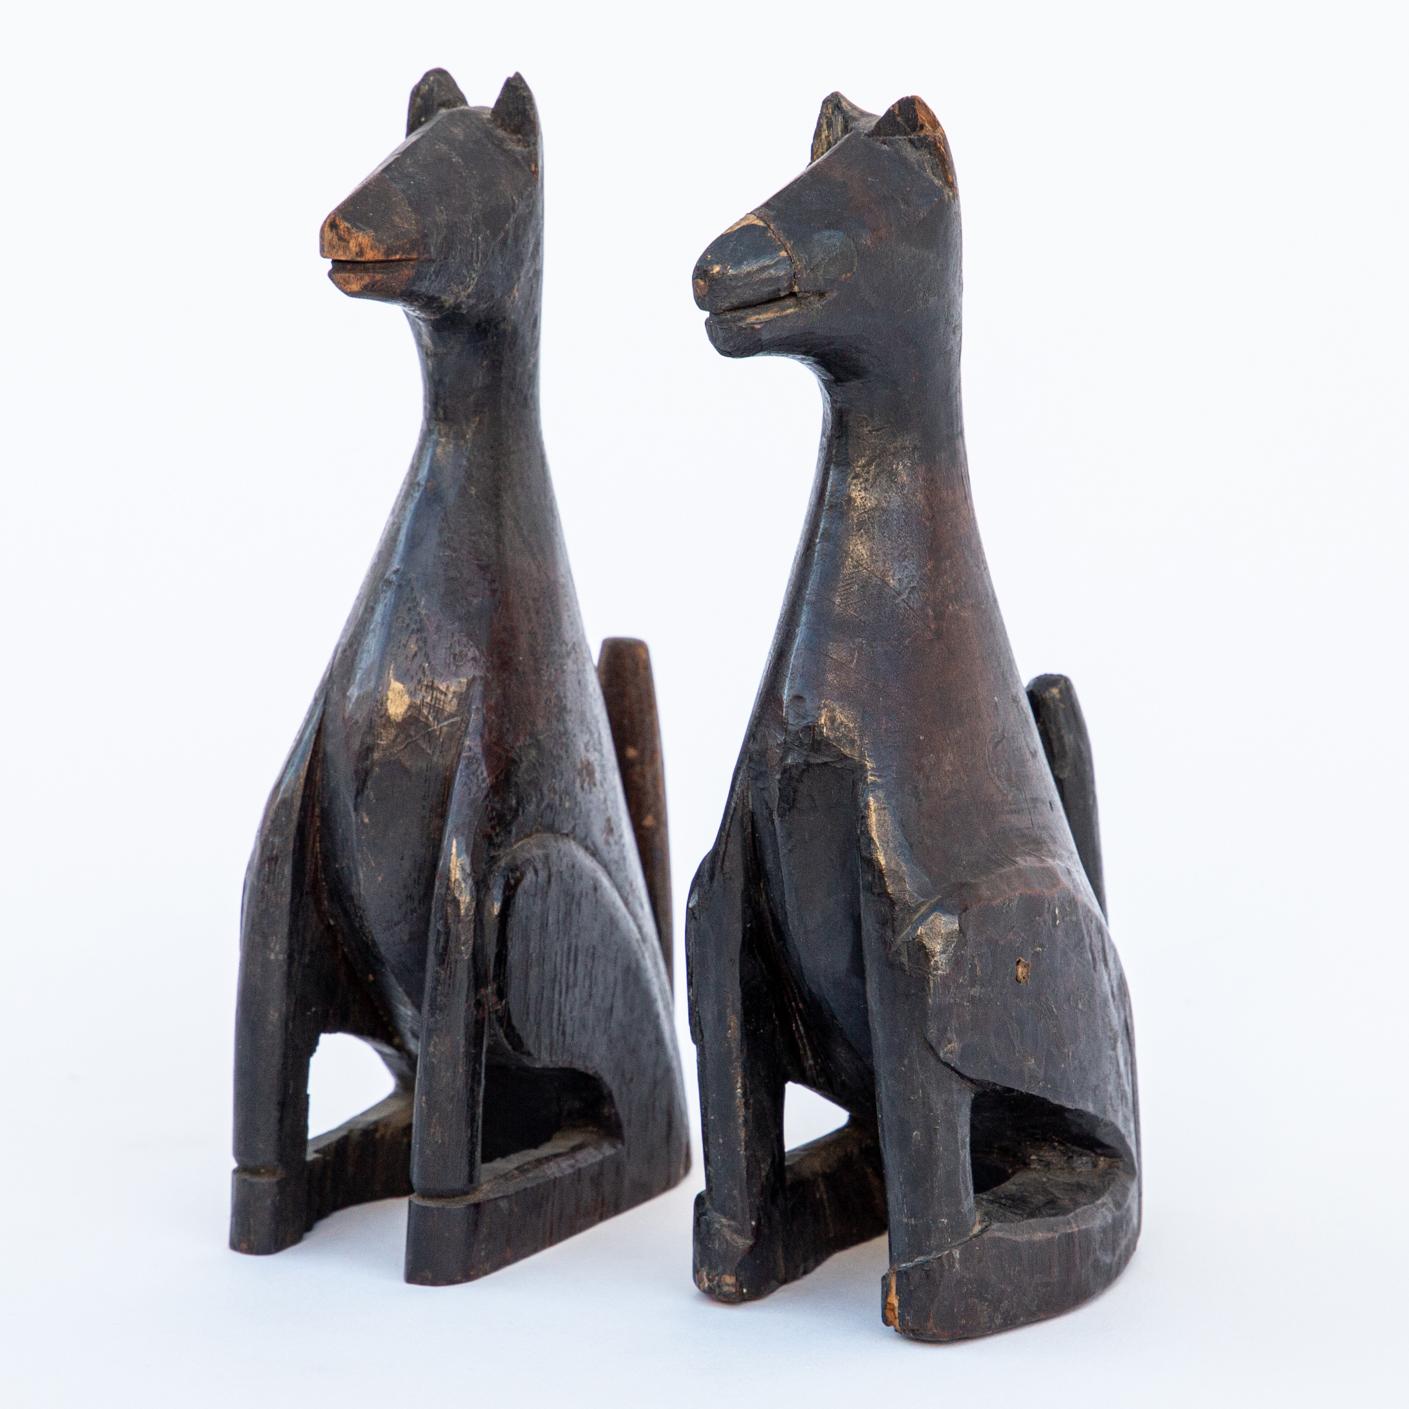 A superb pair of minimally carved, abstracted votive wood fox dolls, the messengers of God based on the Cult of Inari in Japanese culture. Based on their size, these would most likely have formed part of a family’s home shrine or worship place,